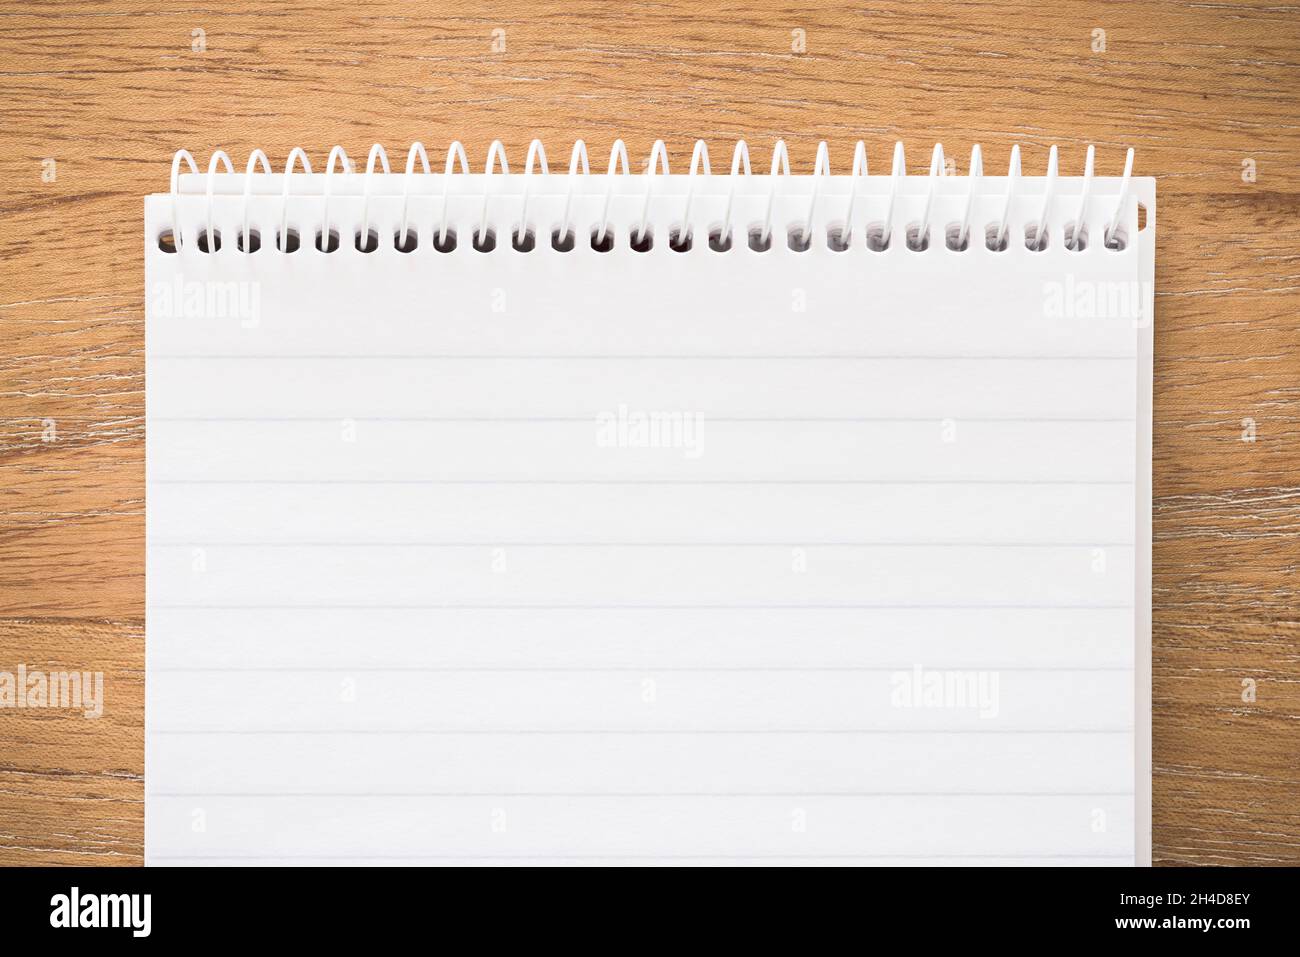 Spiral notebook secretary note pad on a wooden desk. Flat lay template or background Stock Photo